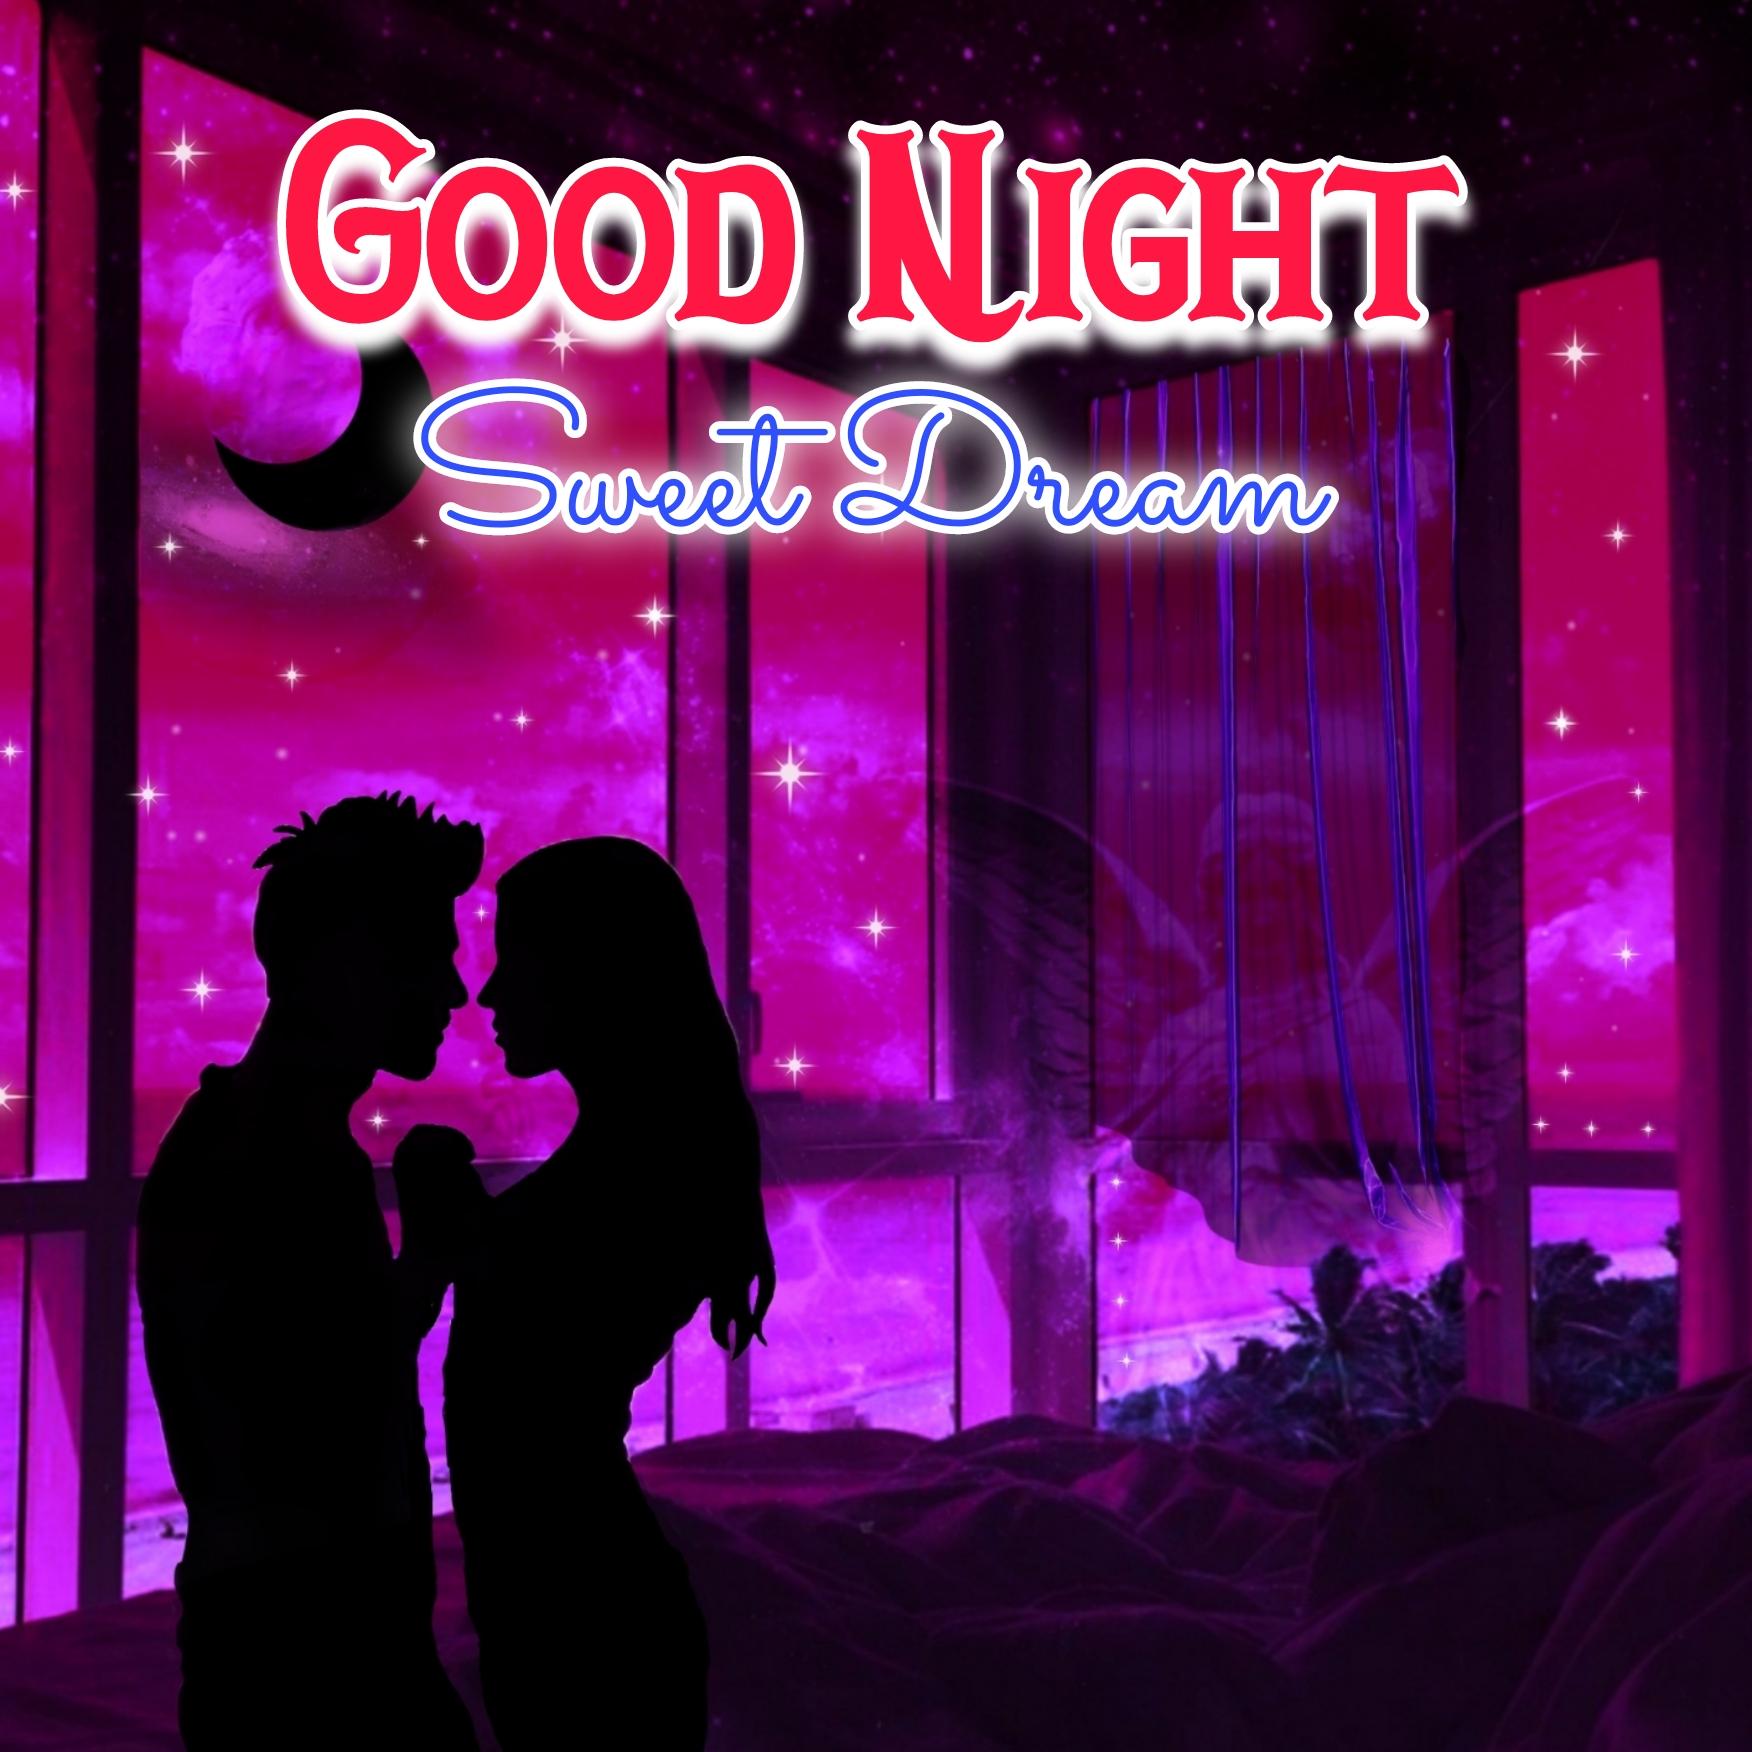 Romantic Good Night Images For Her